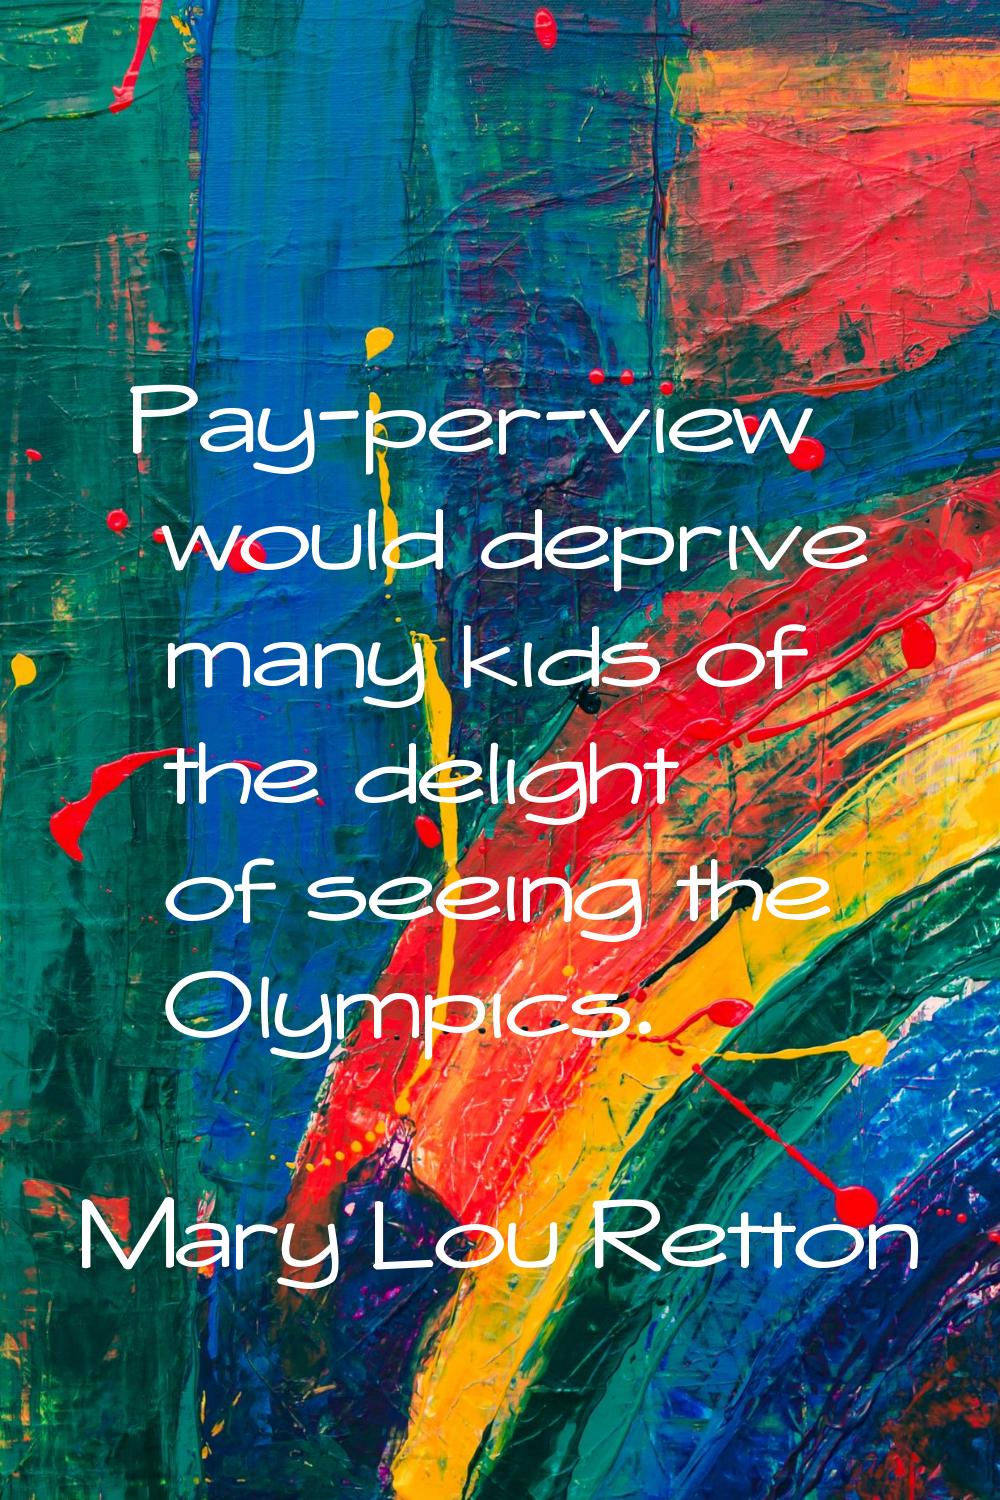 Pay-per-view would deprive many kids of the delight of seeing the Olympics.